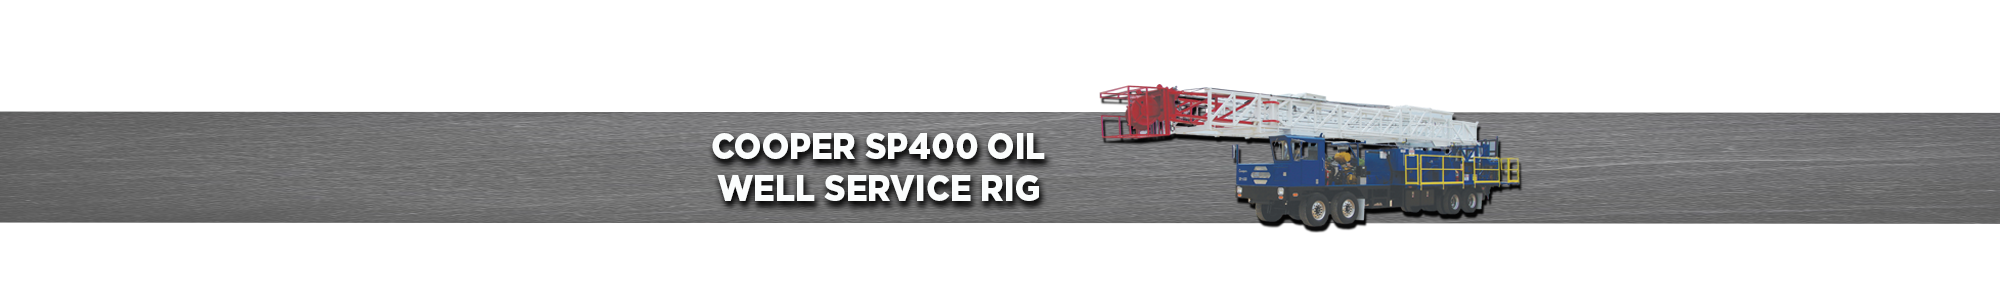 Cooper SP400 Oil Well Service Rig